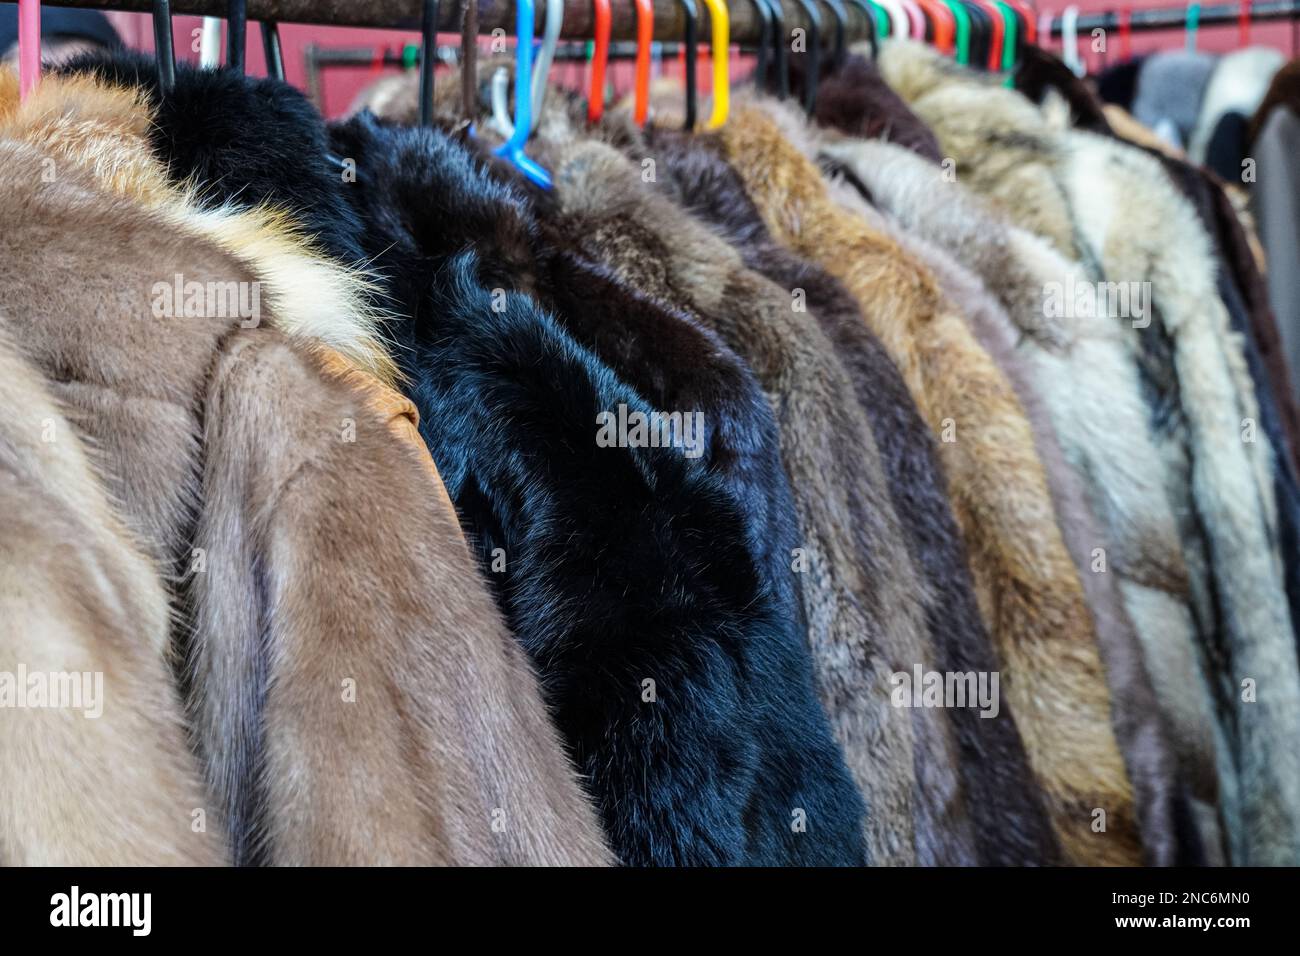 Second hand coats made from animal fur, real fur coats for sale in Portobello Road Market, London England United Kingdom UK Stock Photo